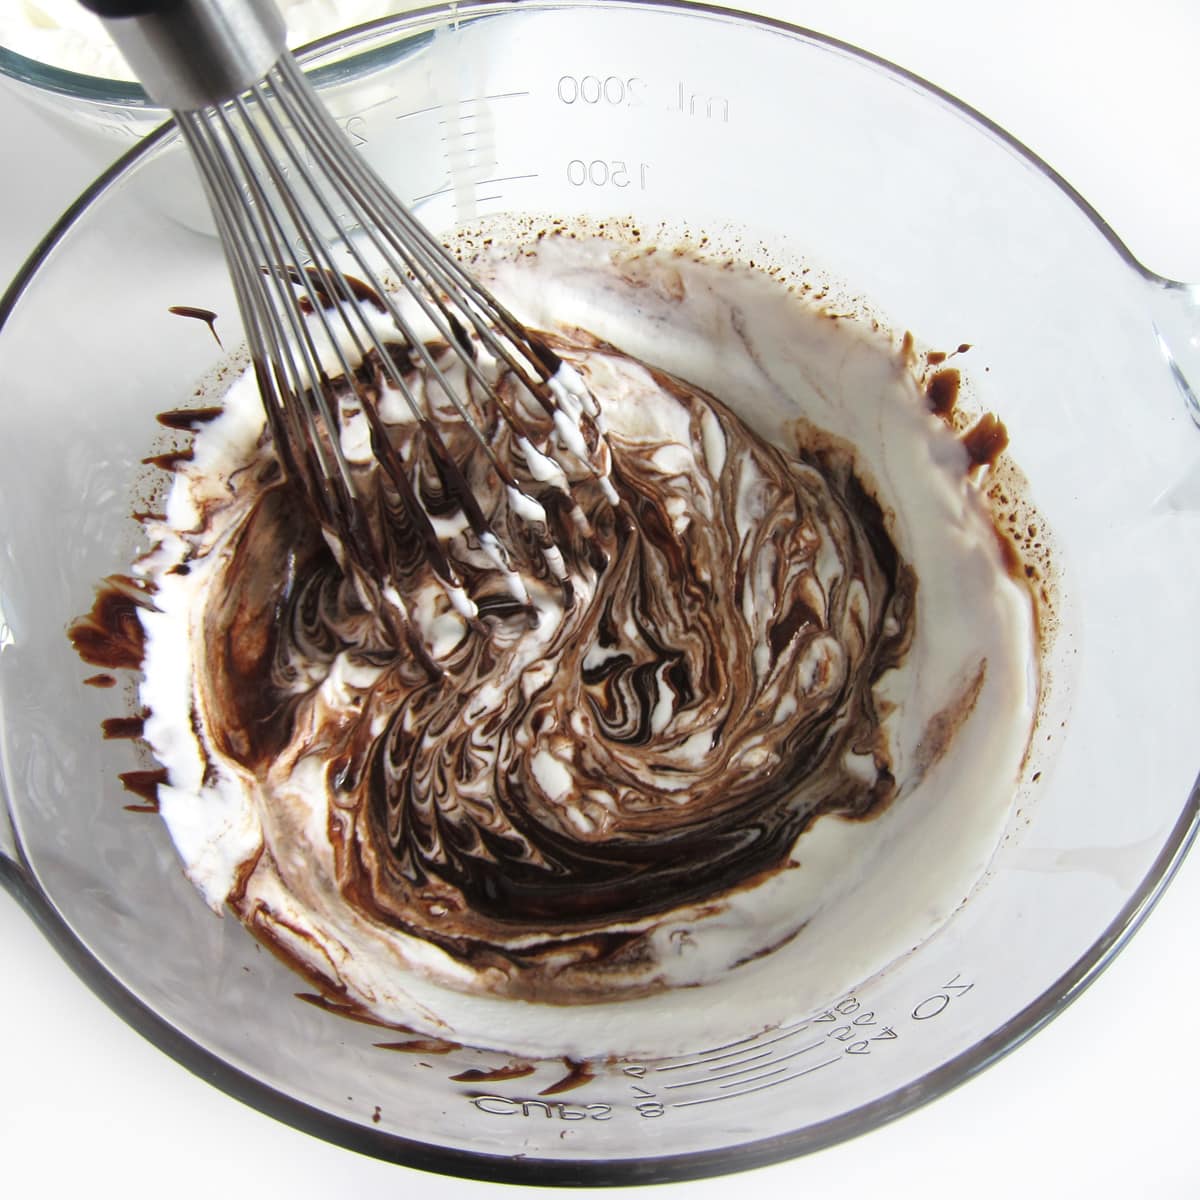 whisking whipped cream and chocolate together